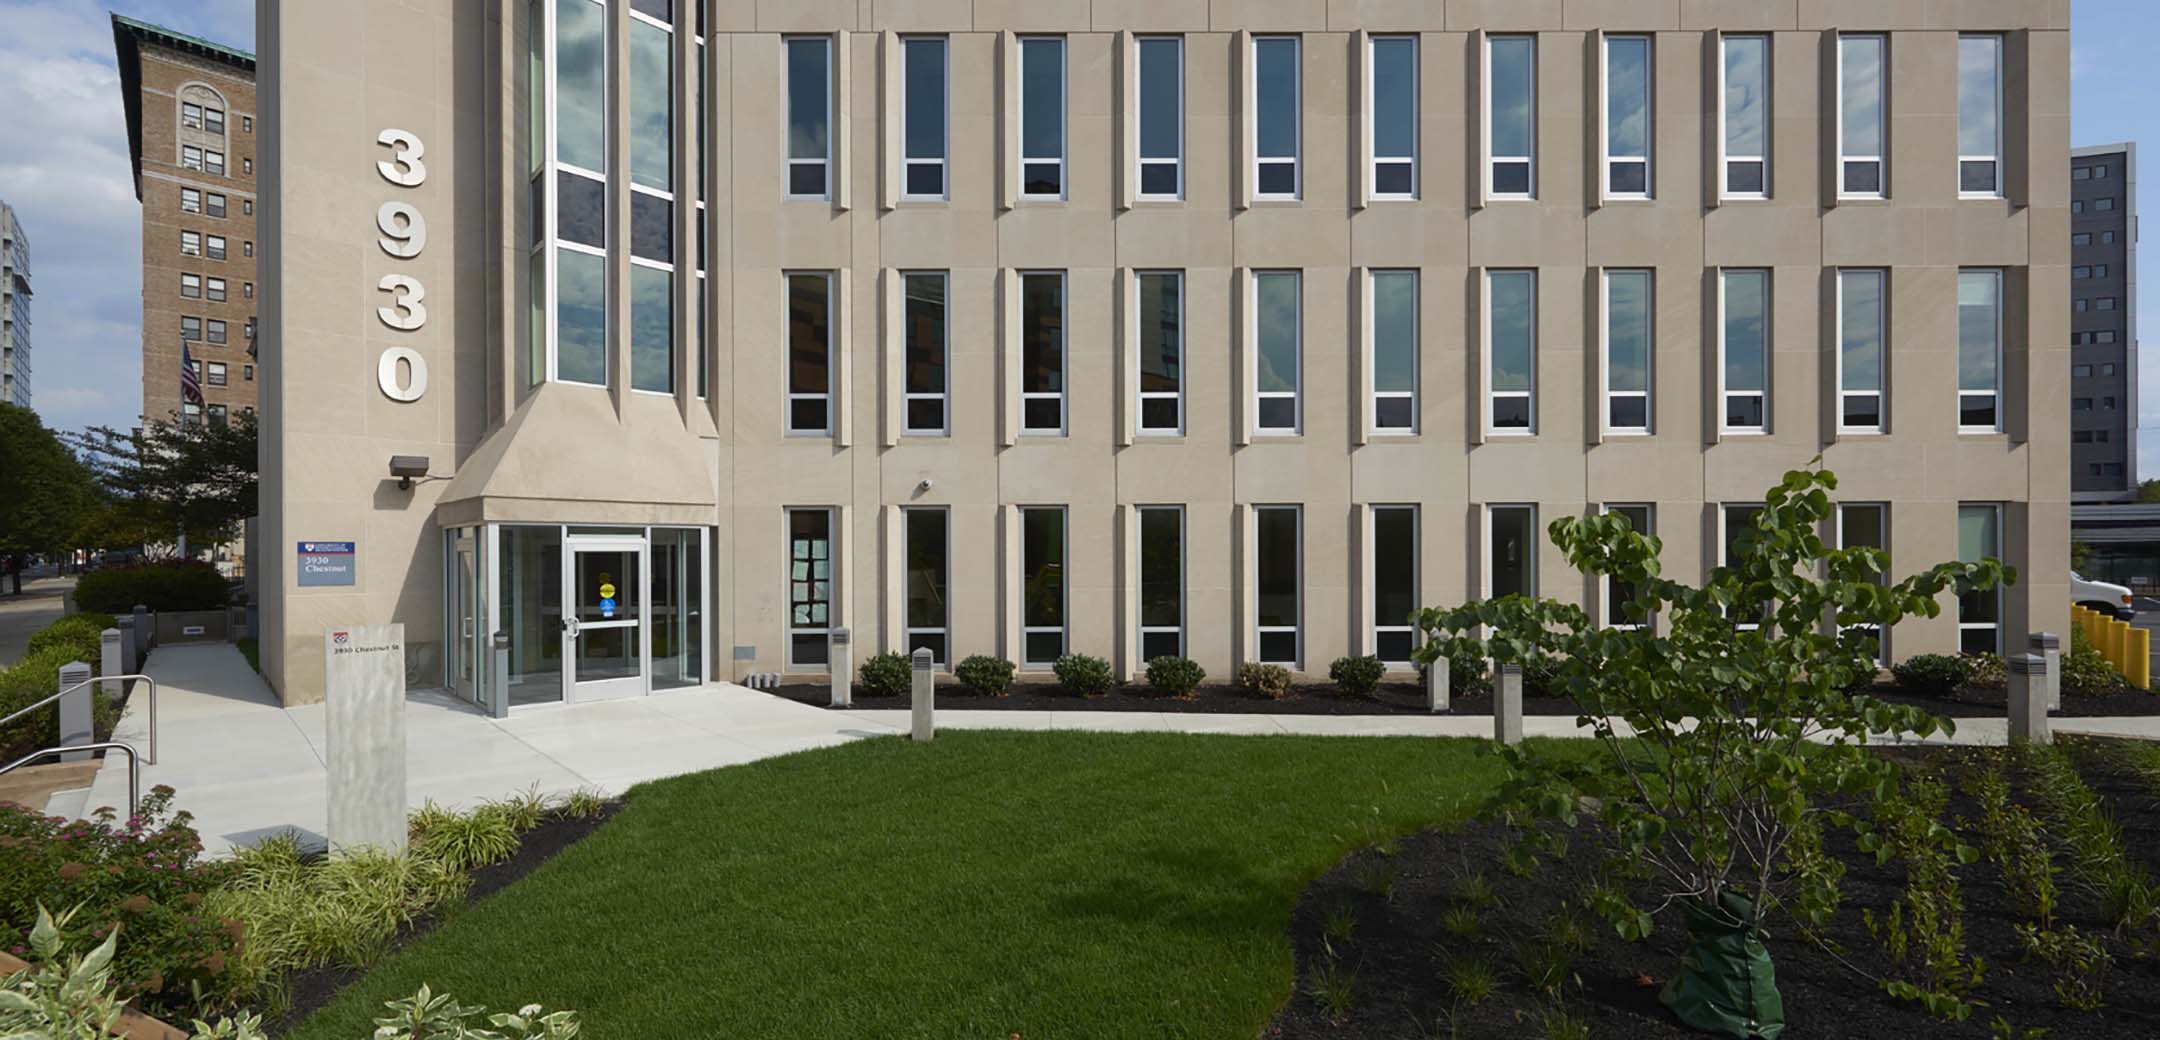 A close up view of the 3930 Chestnut building main entrance showcasing the front walkway and grass lawn.